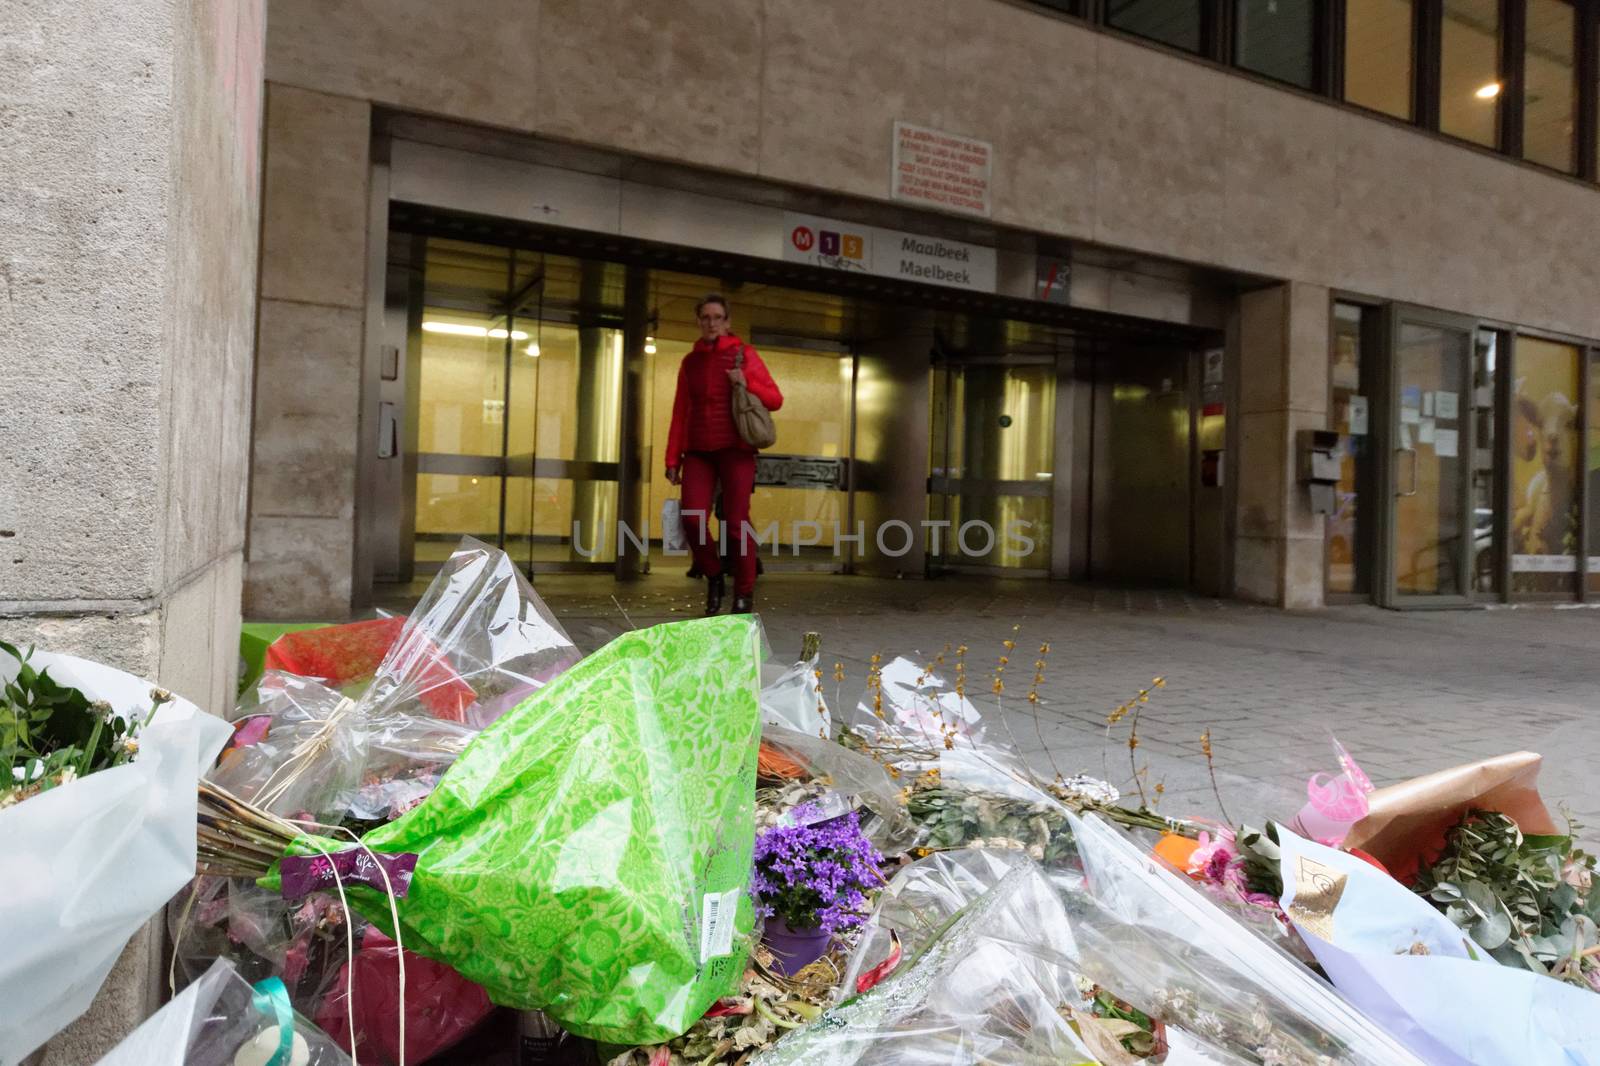 BELGIUM, Brussels : A passager walks in front of Maelbeek - Maalbeek metro station on its re-opening day on April 25, 2016 in Brussels, after being closed since the 22 March attacks in the Belgian capital.Maelbeek - Maalbeek metro station was hit by one of the three Islamic State suicide bombers who struck Brussels airport and metro on March 22, killing 32 people and injuring hundreds.